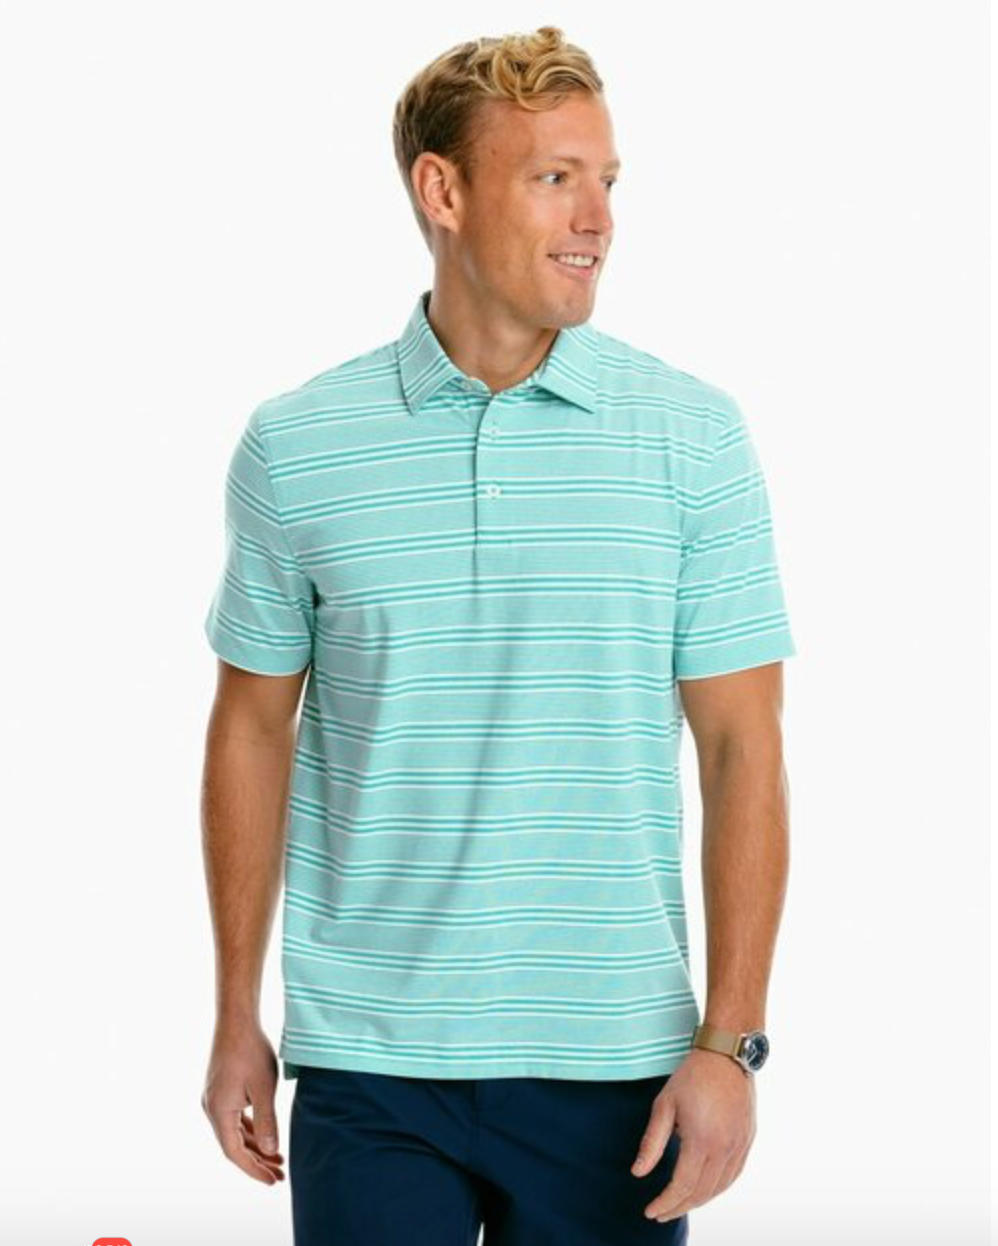 Southern Tide Men's Heather Driver Stipe Performance Polo